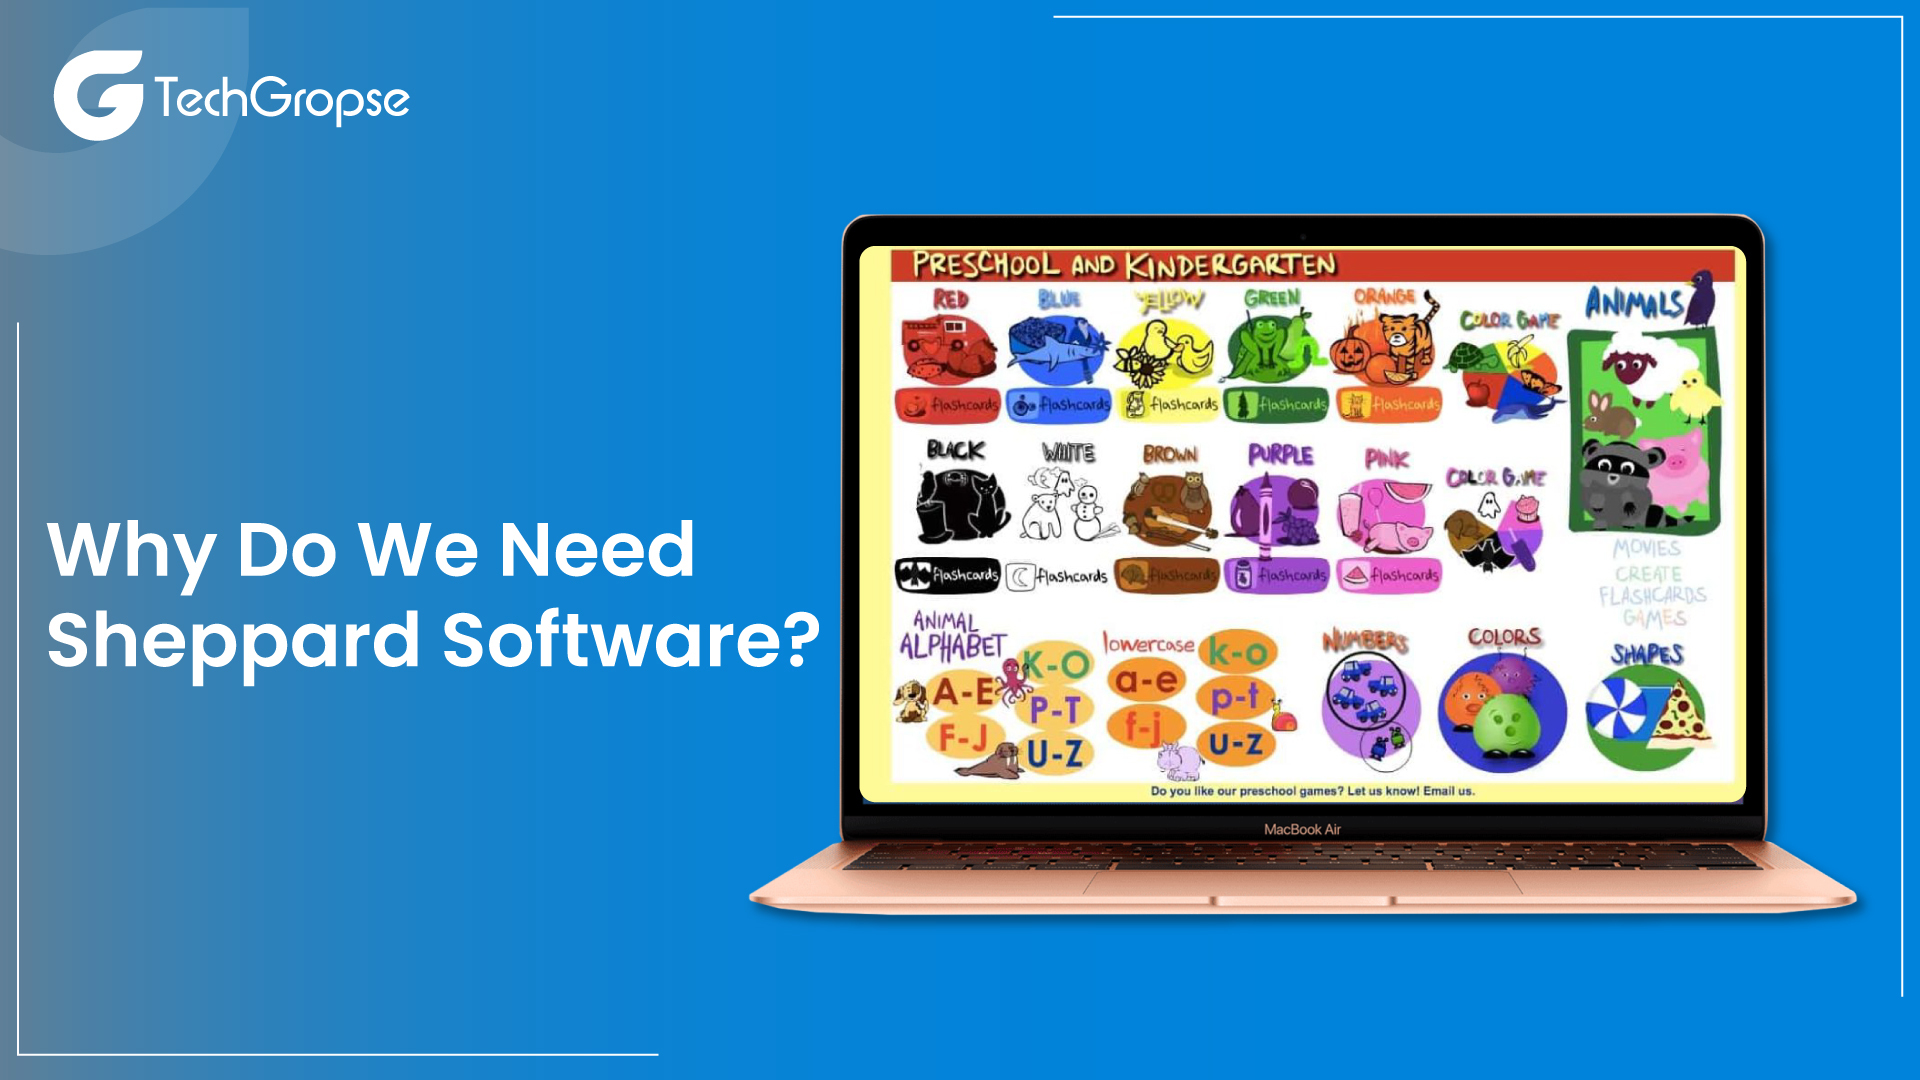 Why Do We Need Sheppard Software?